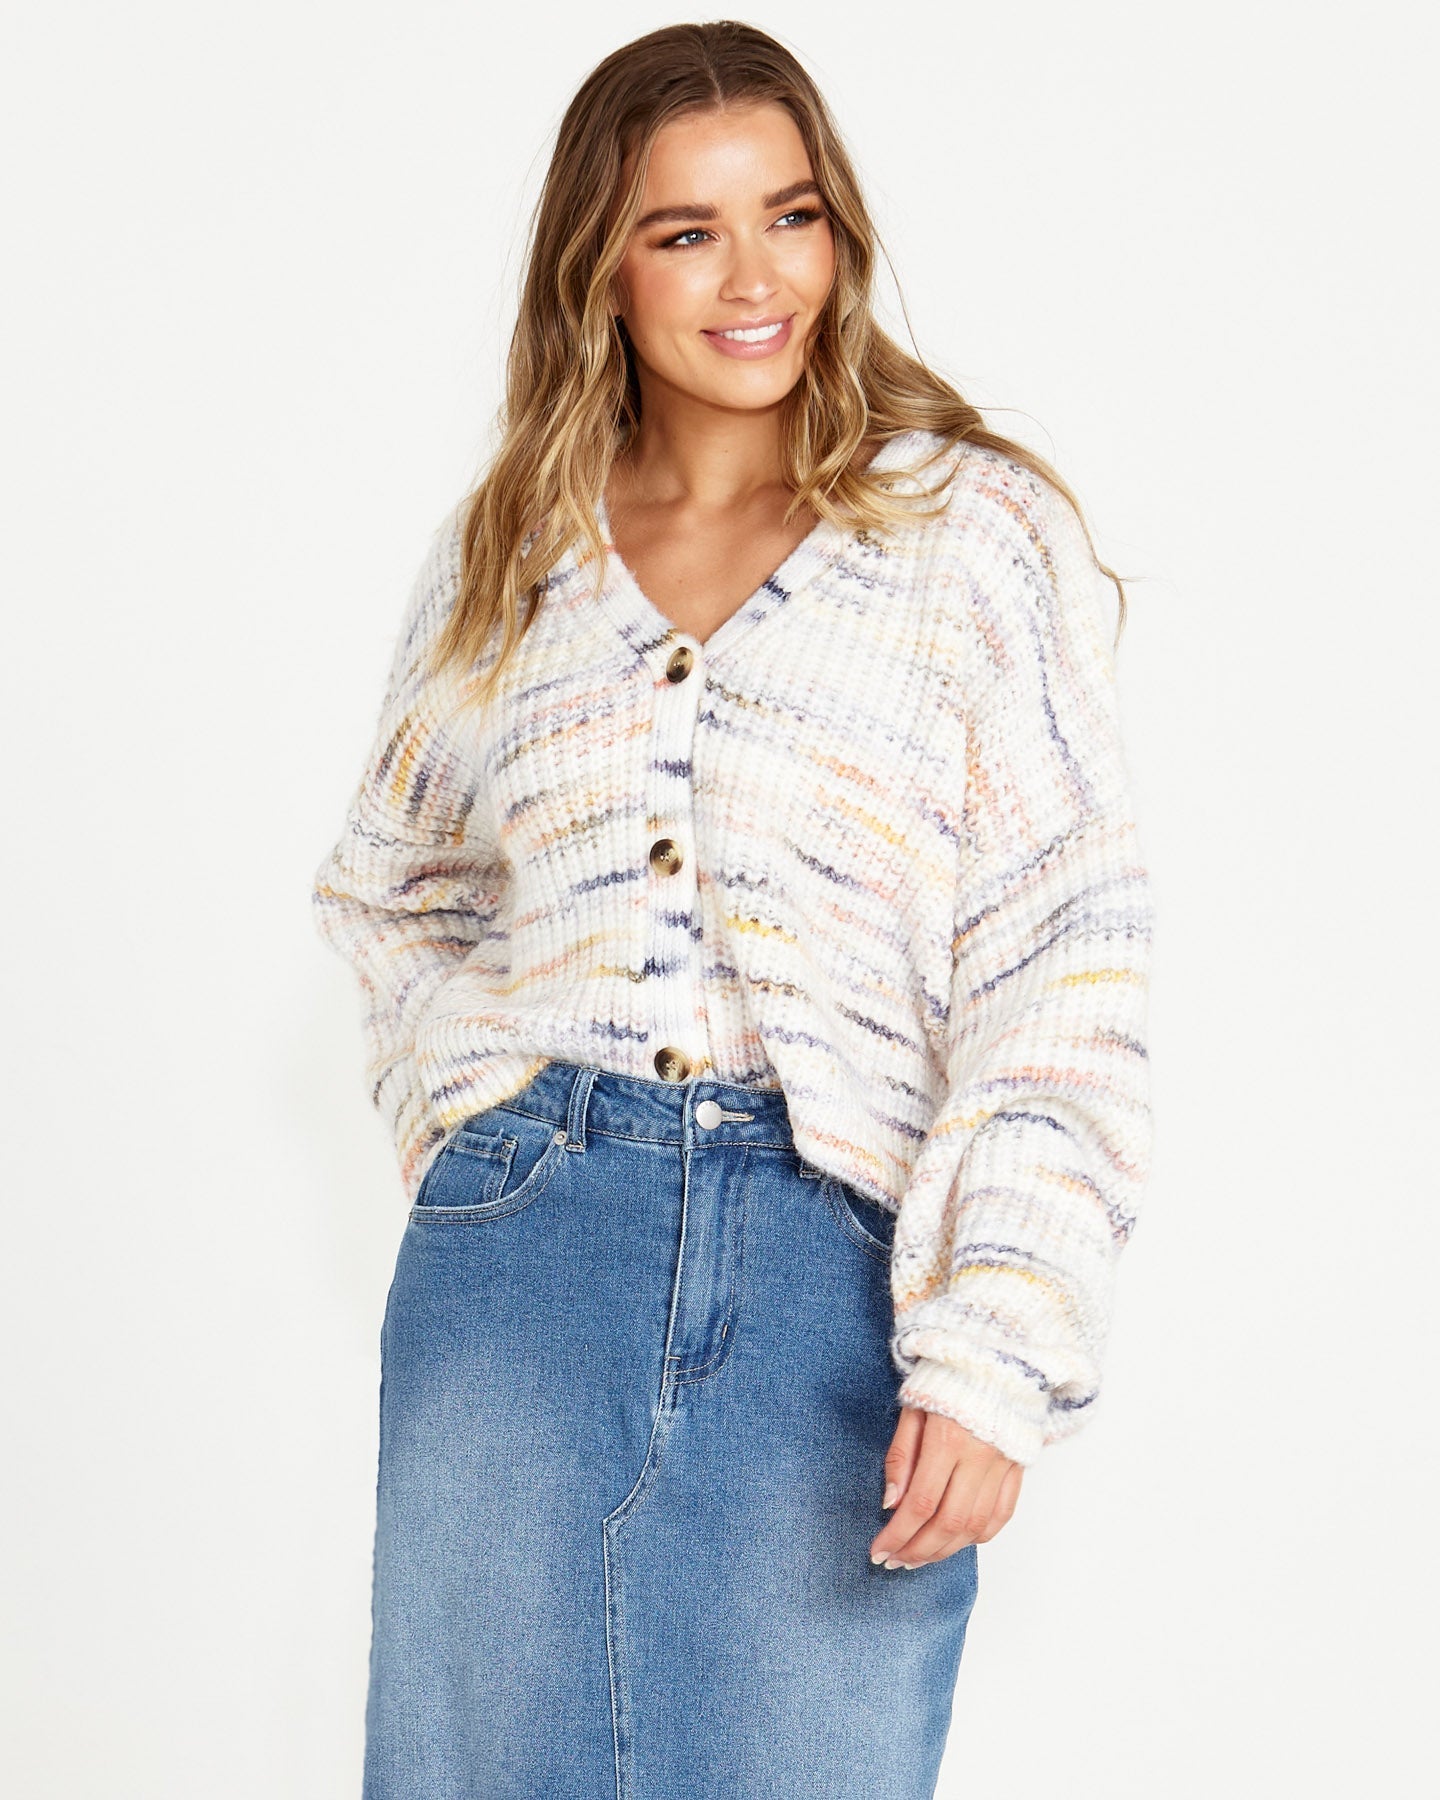 Pepper Space Cardi - Rainbow Marle-Knitwear & Jumpers-SASS-The Bay Room